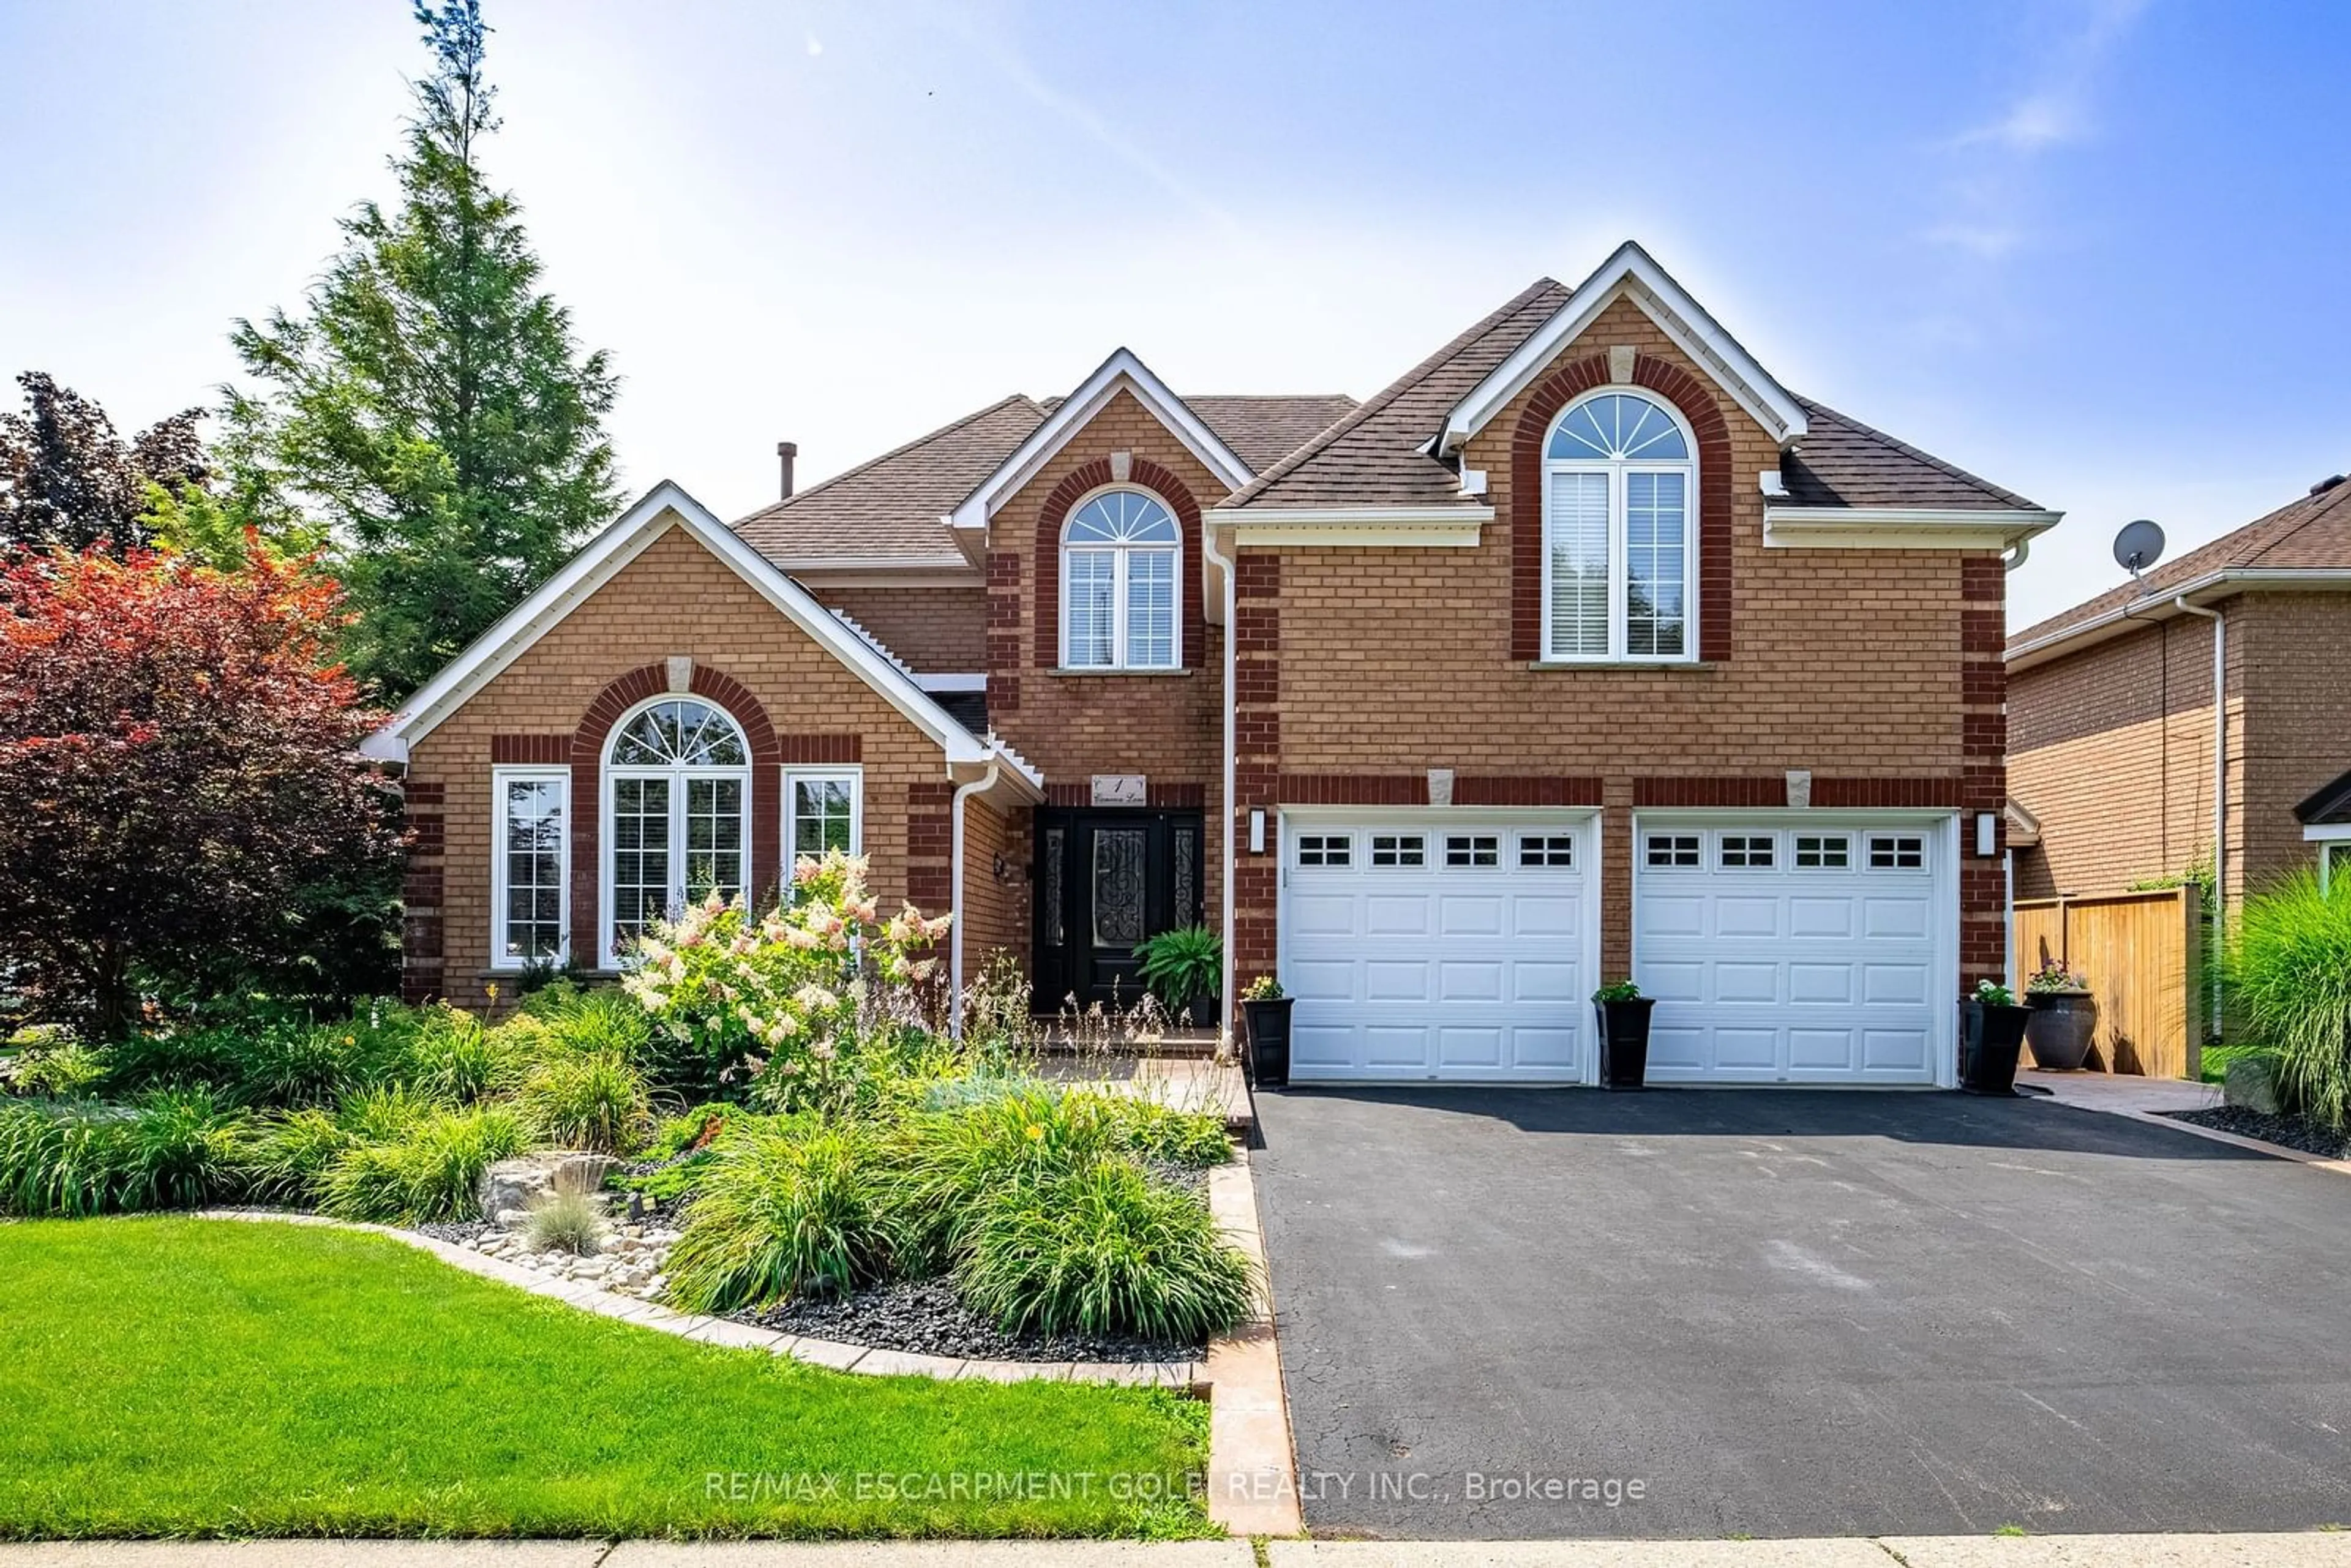 Home with brick exterior material for 1 Cameron Lane, Brantford Ontario N3R 7T1